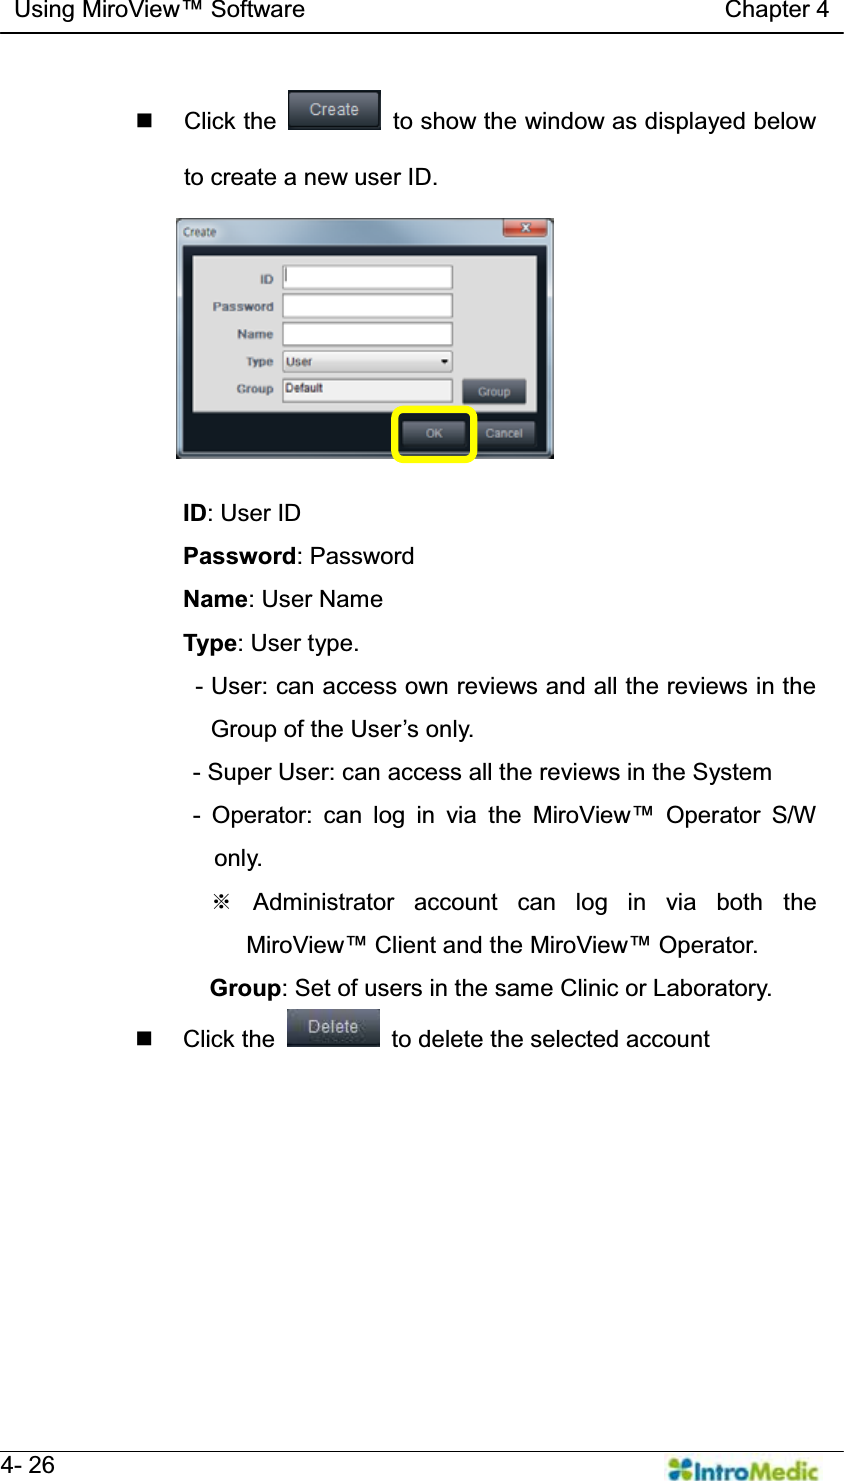   Using MiroView Software                                   Chapter 4   4- 26  Click the    to show the window as displayed below to create a new user ID.  ID: User ID Password: Password Name: User Name Type: User type. - User: can access own reviews and all the reviews in the *URXSRIWKH8VHU¶VRQO\ - Super User: can access all the reviews in the System - Operator: can log in via the 0LUR9LHZ Operator S/W only. ୔ Administrator account can log in via both the 0LUR9LHZ Client and the 0LUR9LHZOperator. Group: Set of users in the same Clinic or Laboratory.  Click the    to delete the selected account  